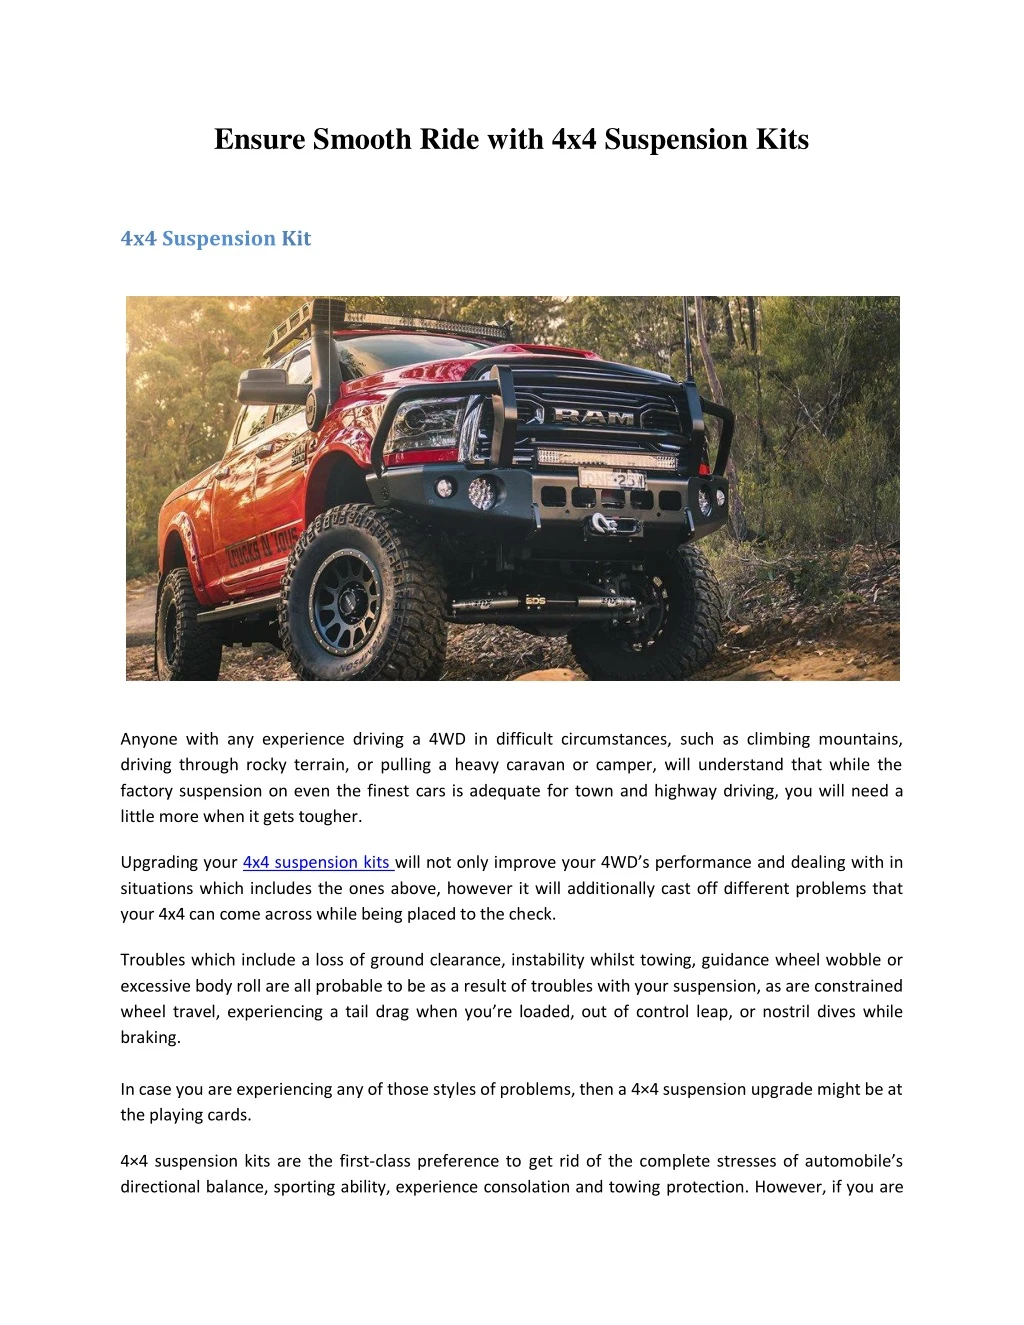 ensure smooth ride with 4x4 suspension kits